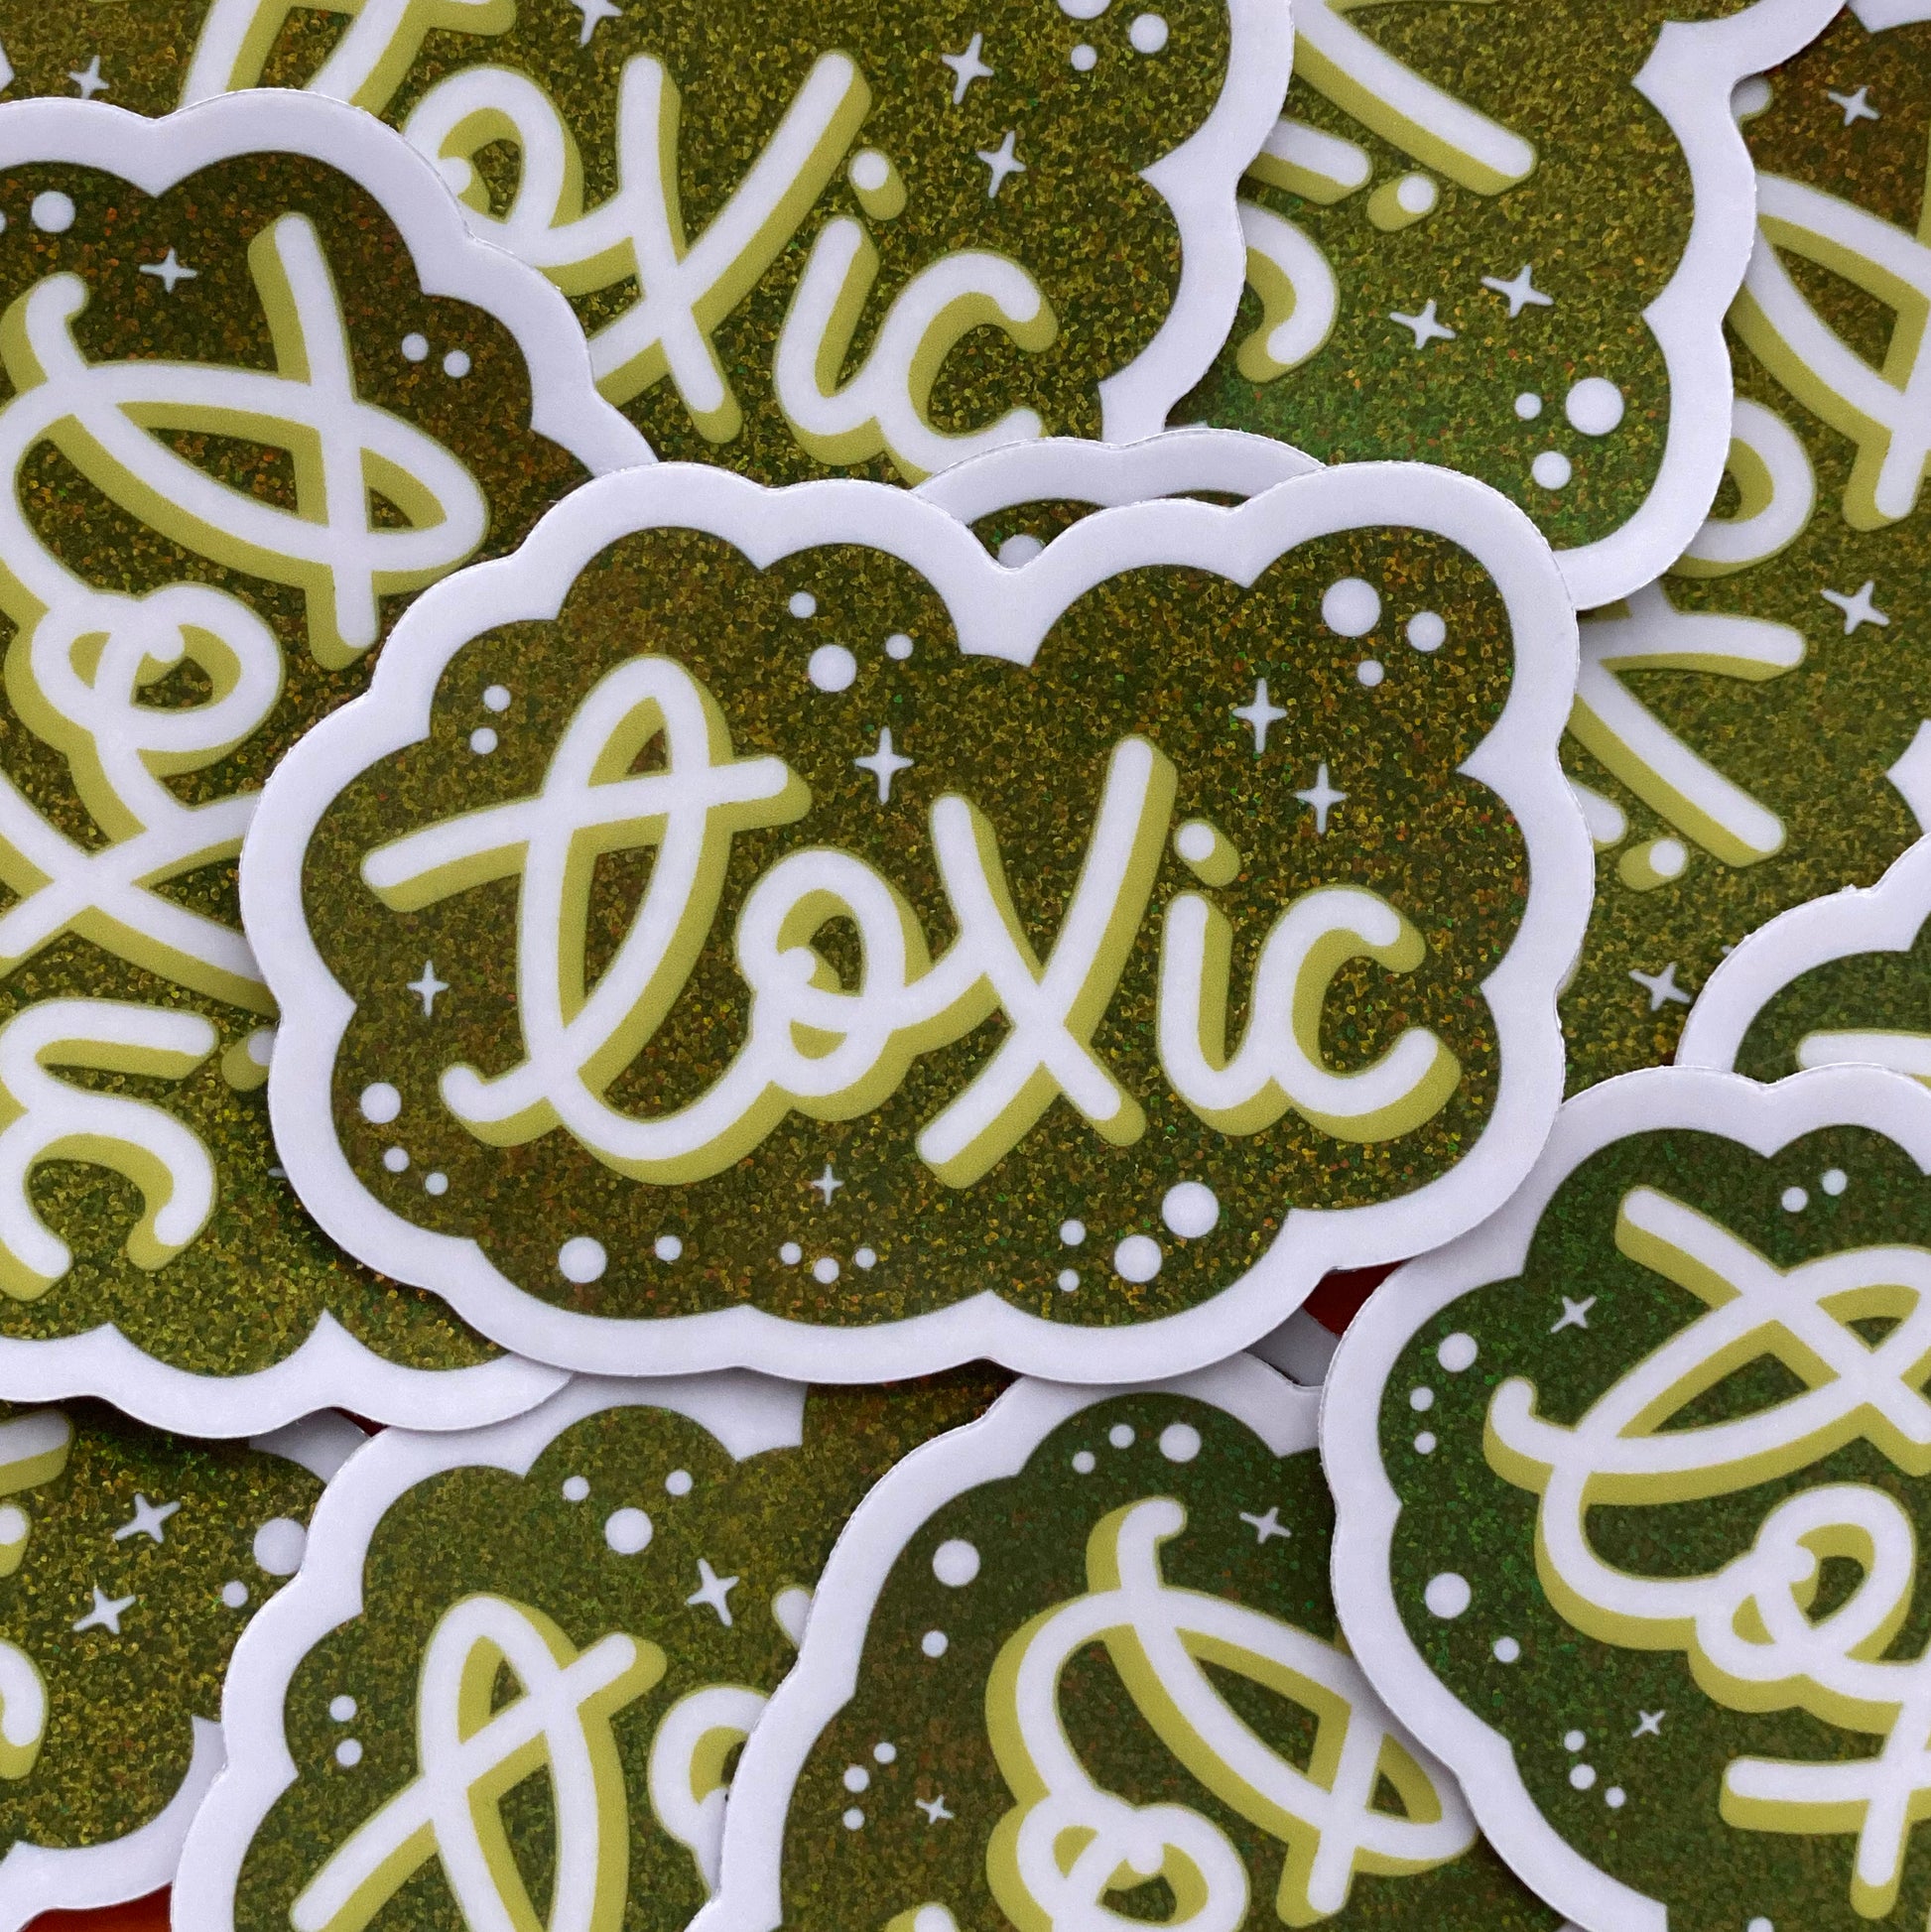 A pile of green glitter stickers that say "Toxic" in script. 